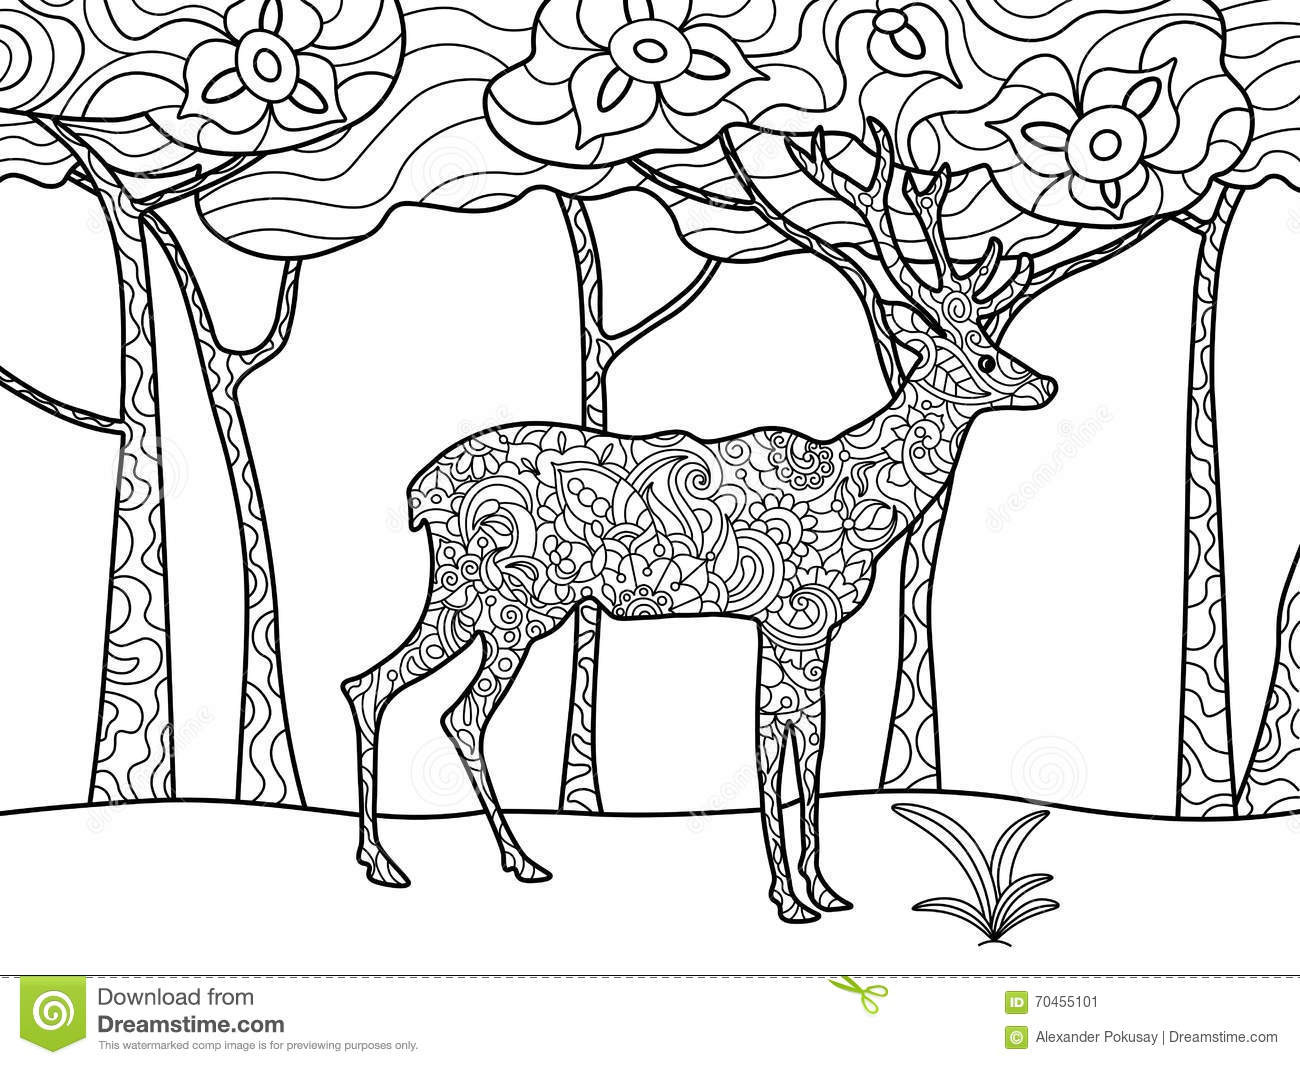 Deer Coloring Pages For Adults
 Deer Coloring Book For Adults Raster Stock Vector